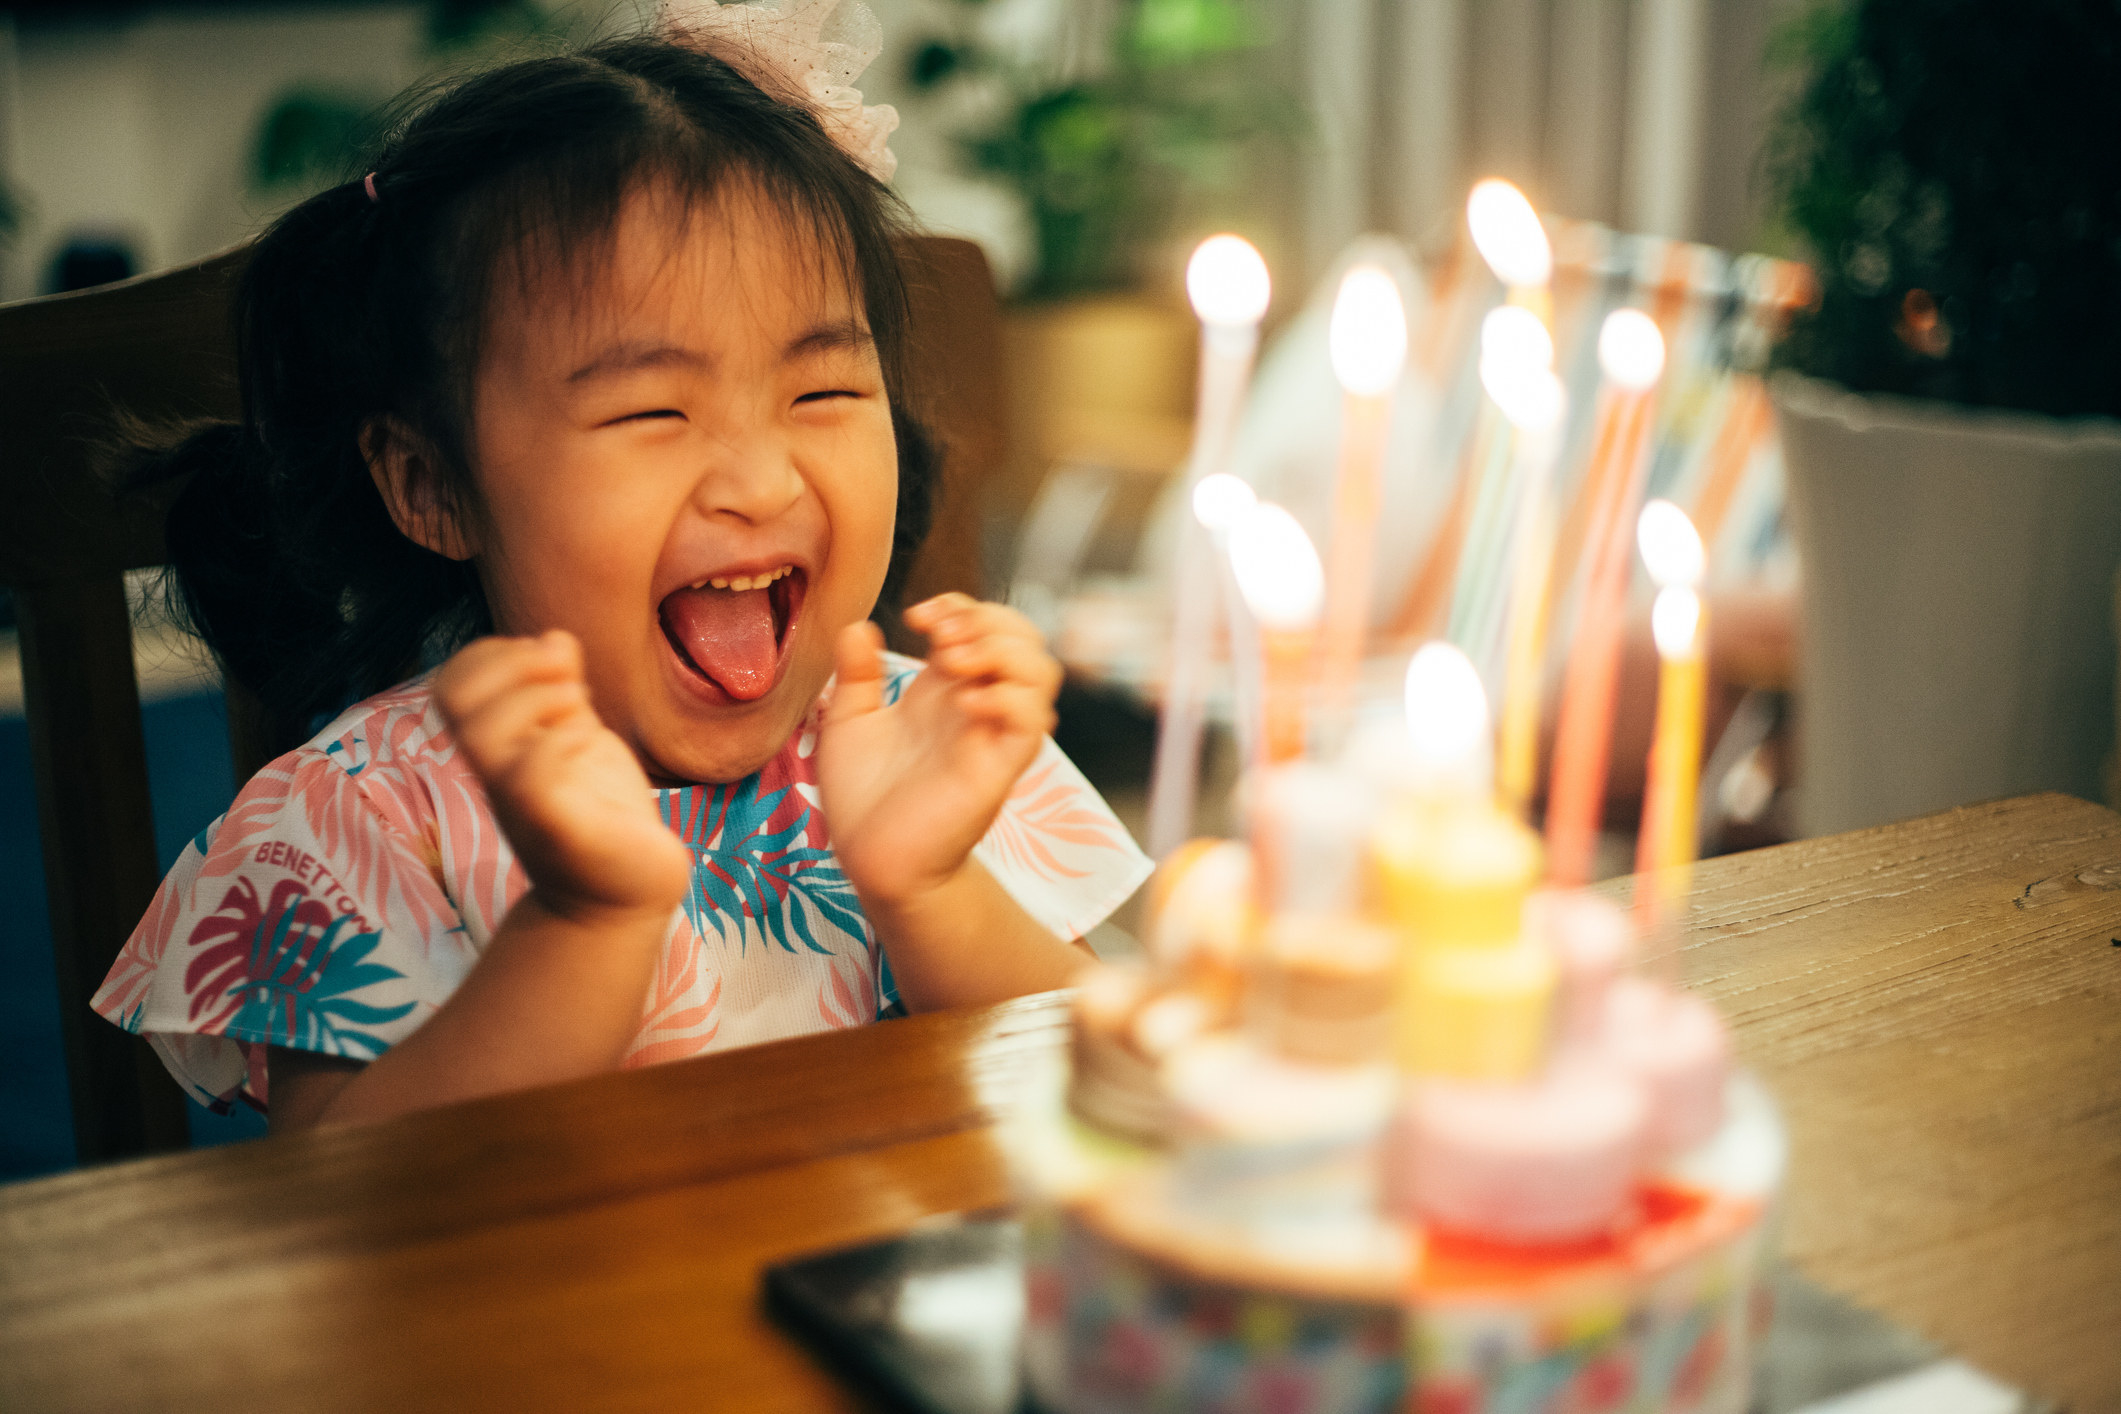 A little girl smiling at her birthday cake